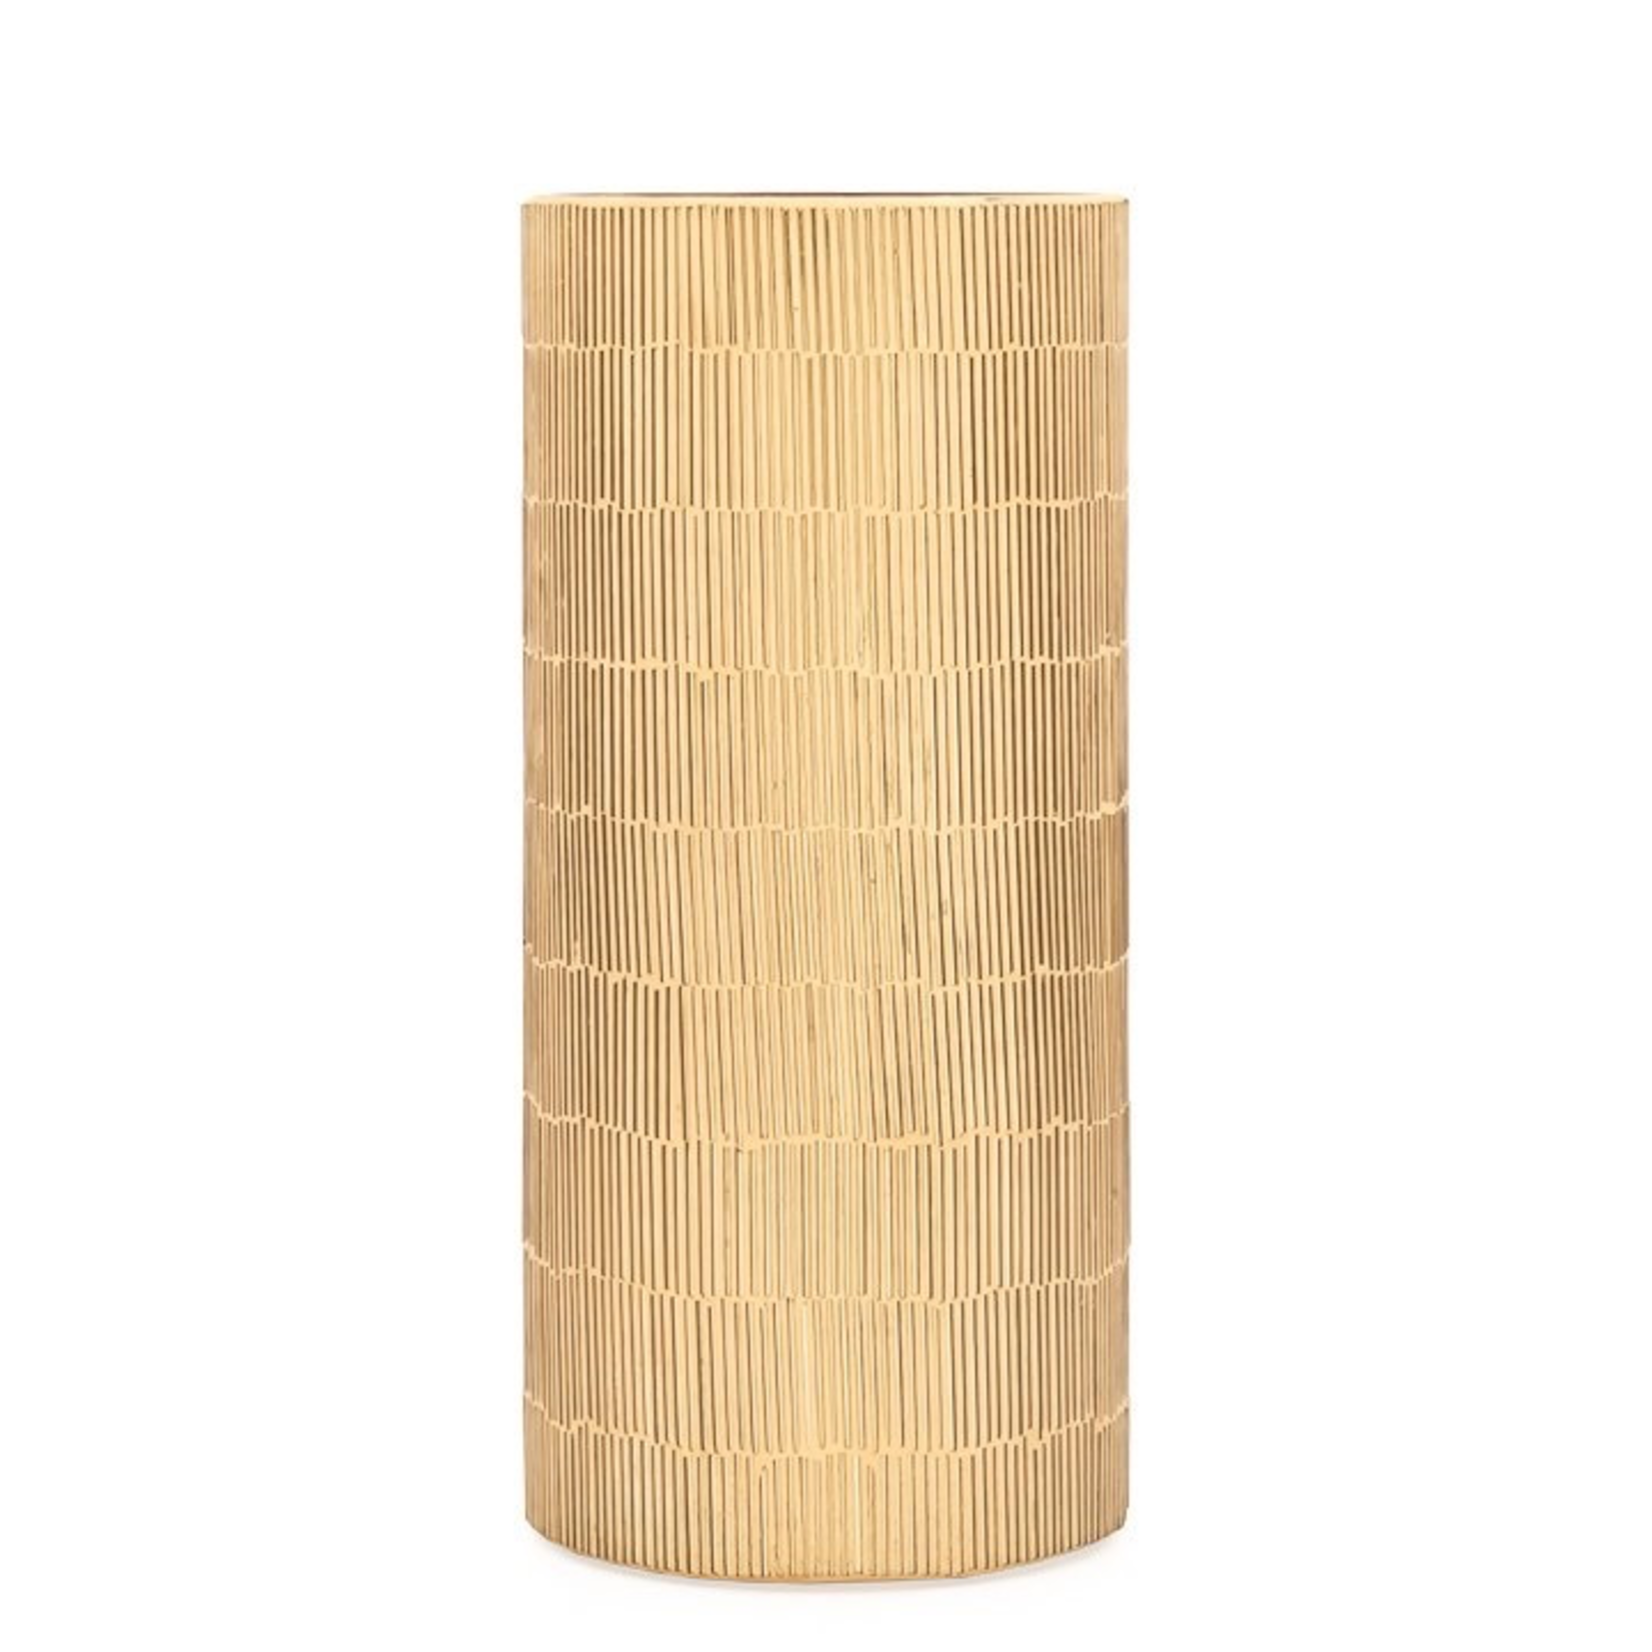 Torre & Tagus Bamboo Glass Mosaic 4d x 9"Cylinder Vase - Gold